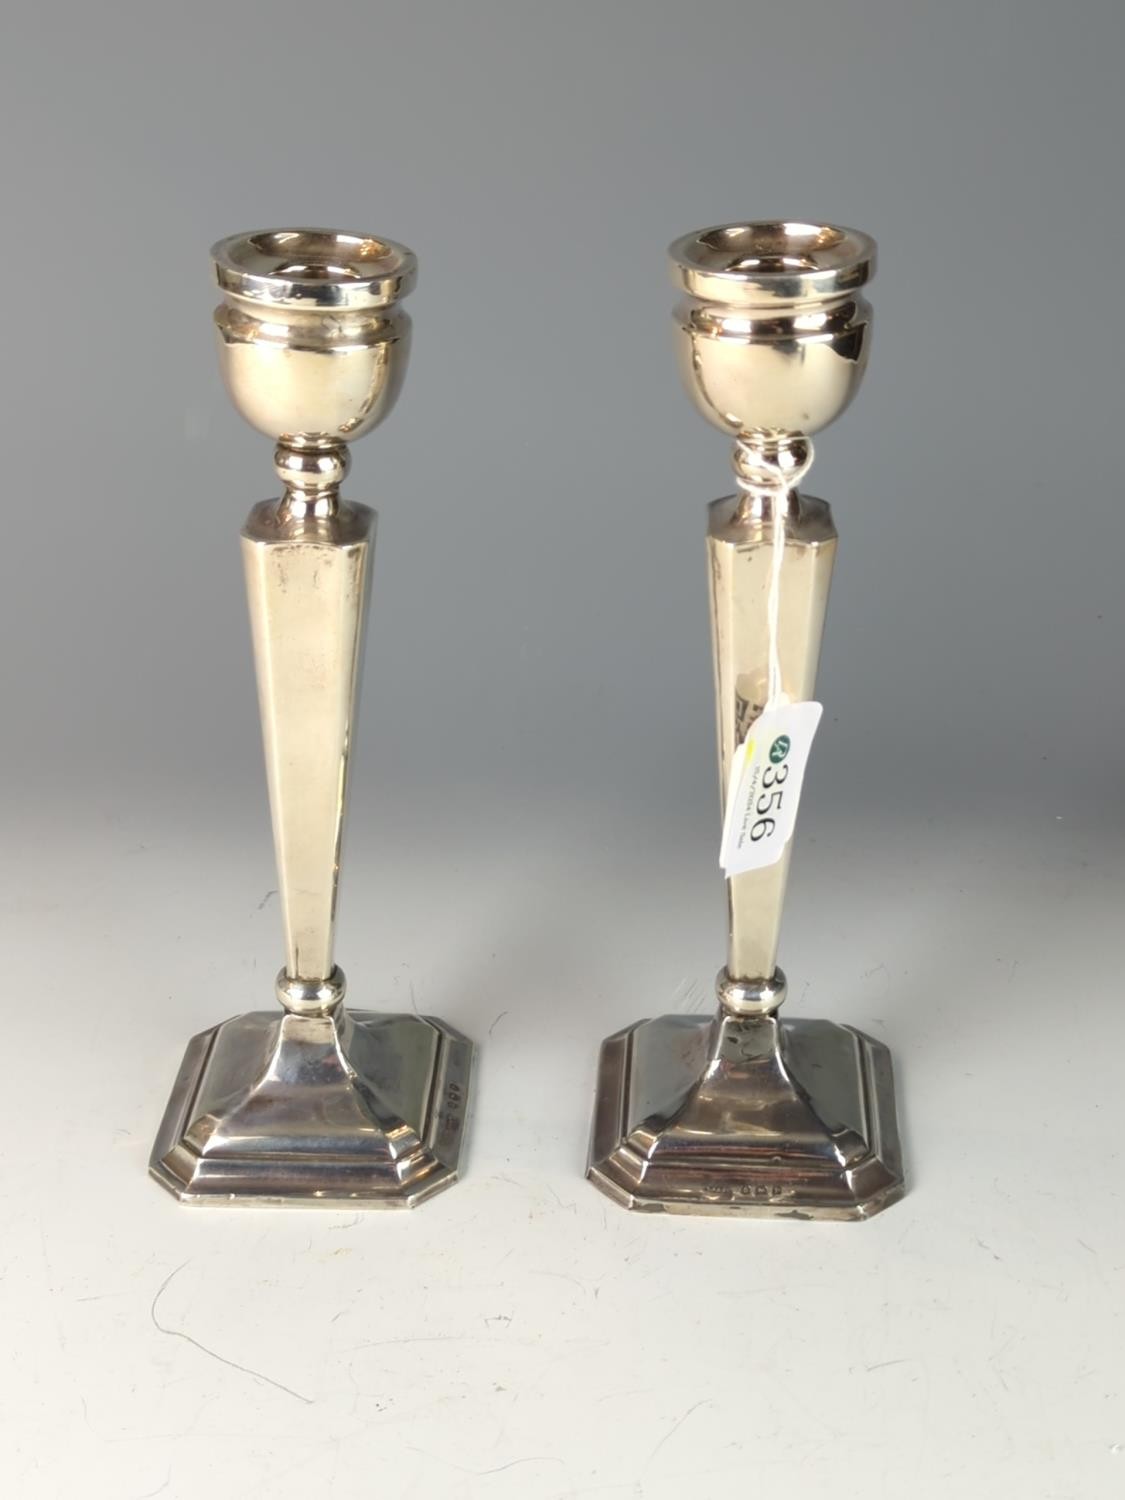 Pair of silver candlesticks, Britton, Gould & Co, Birmingham 1939, each with urn-shaped nozzles, tap